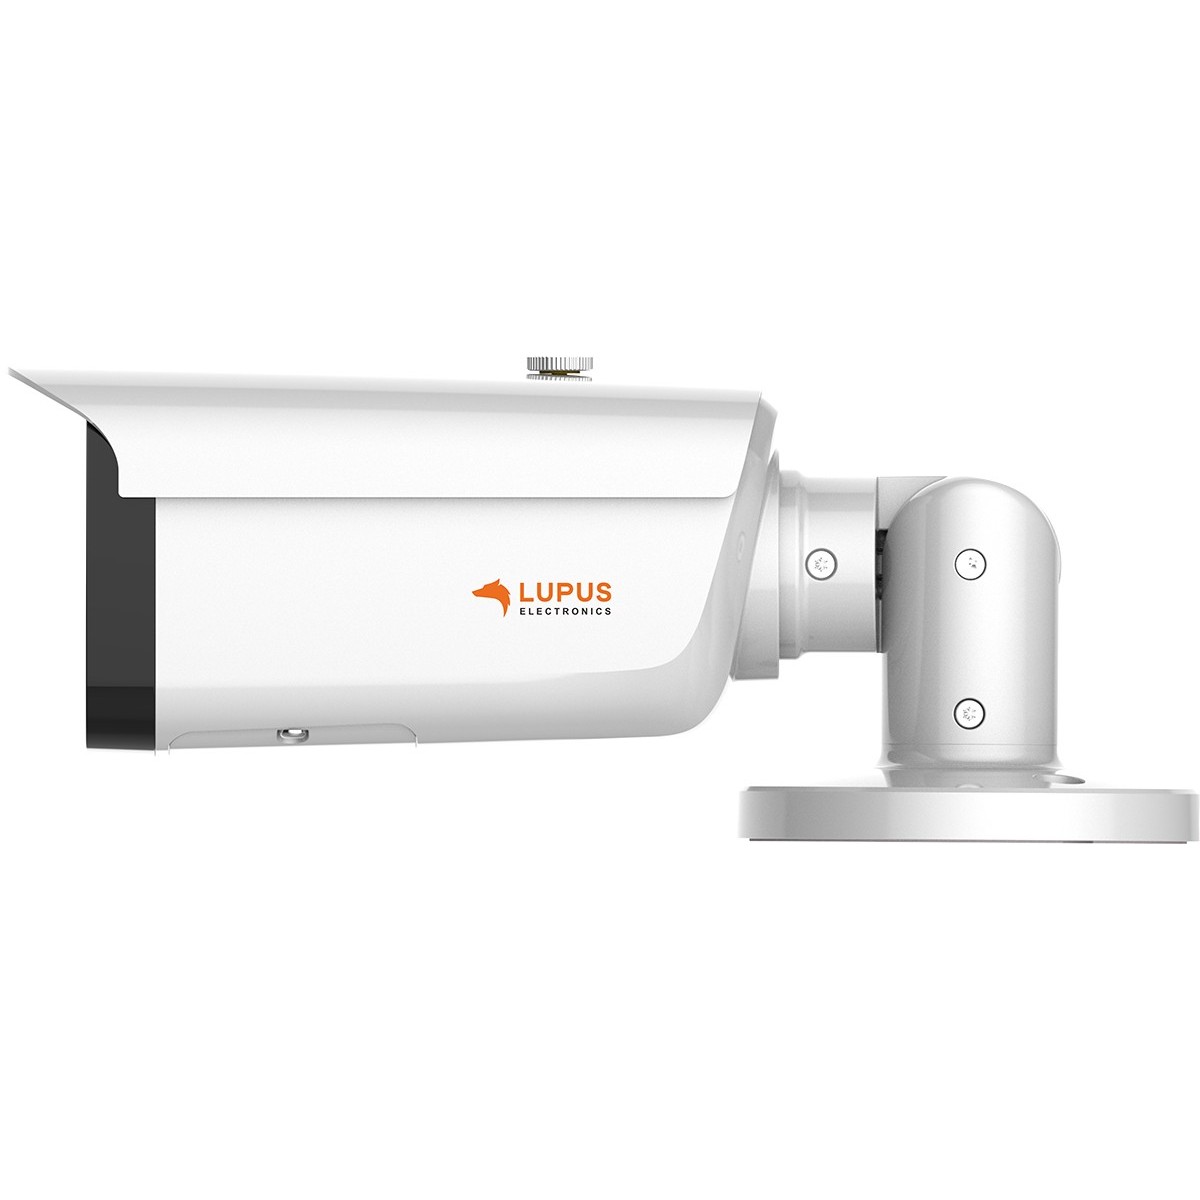 Lupus Electronics LE221 - IP security camera - Outdoor - Wired - Bullet - Ceiling/Wall - White